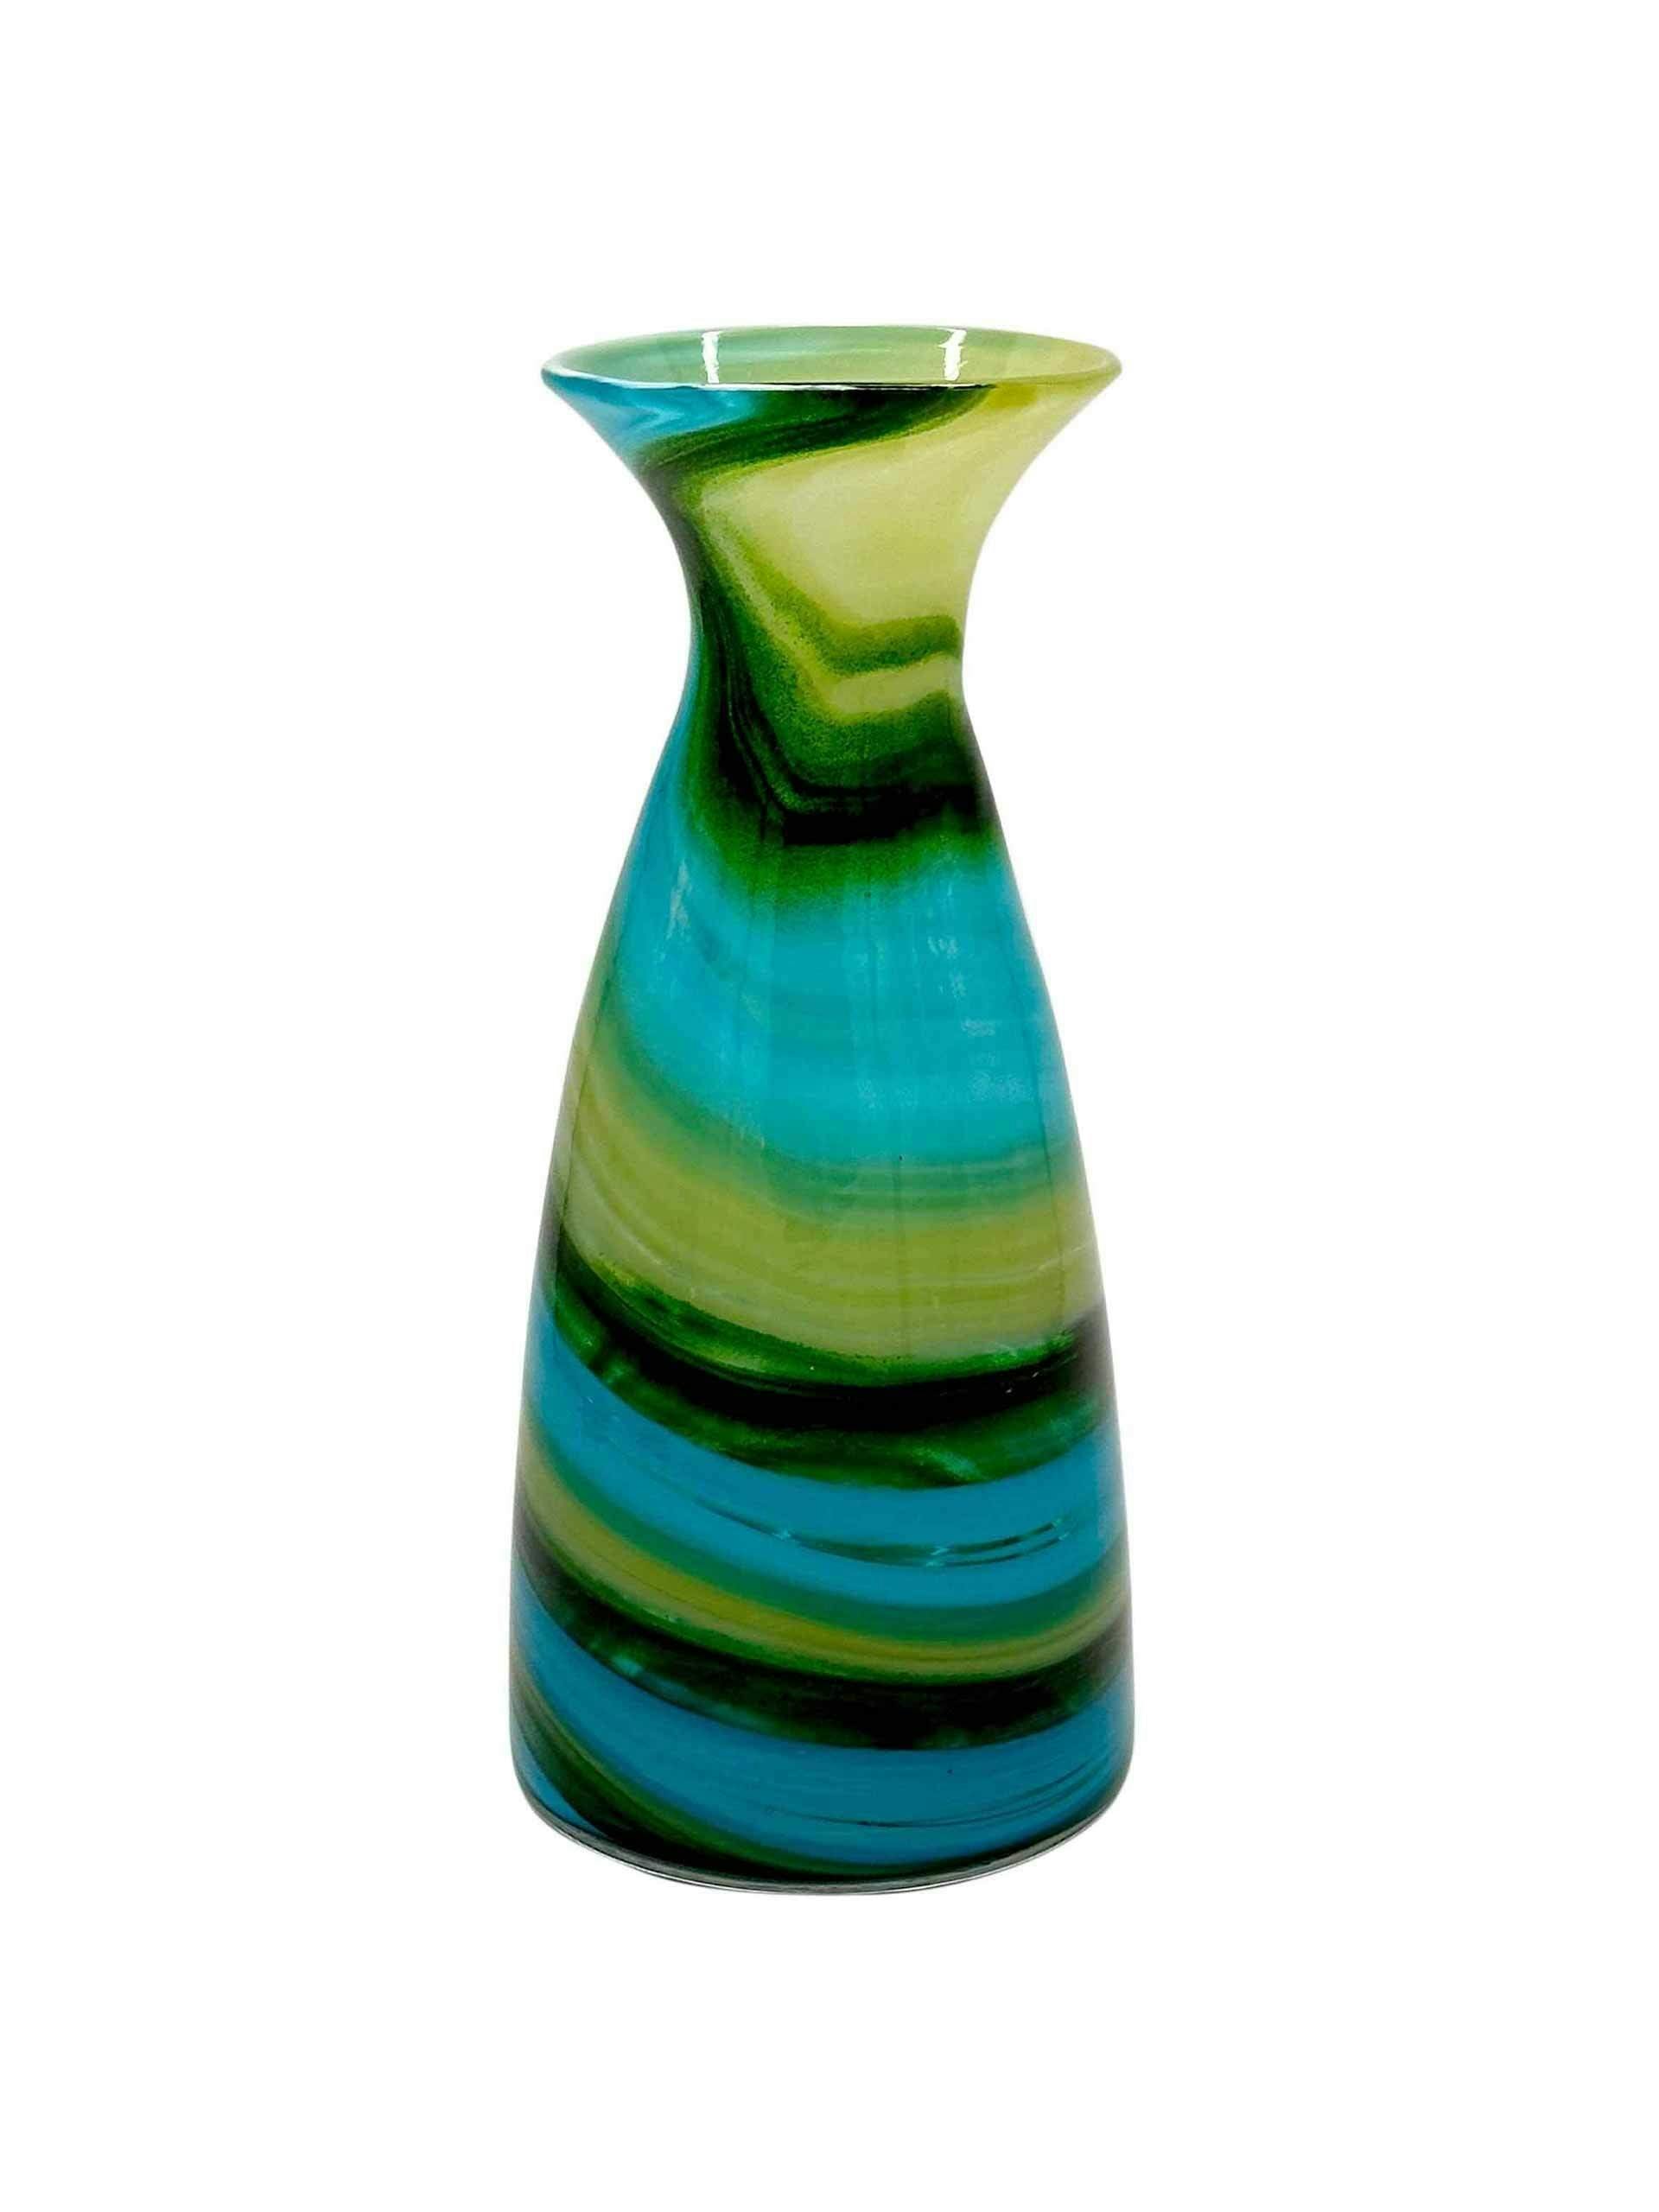 Bellotto carafe in blue and green